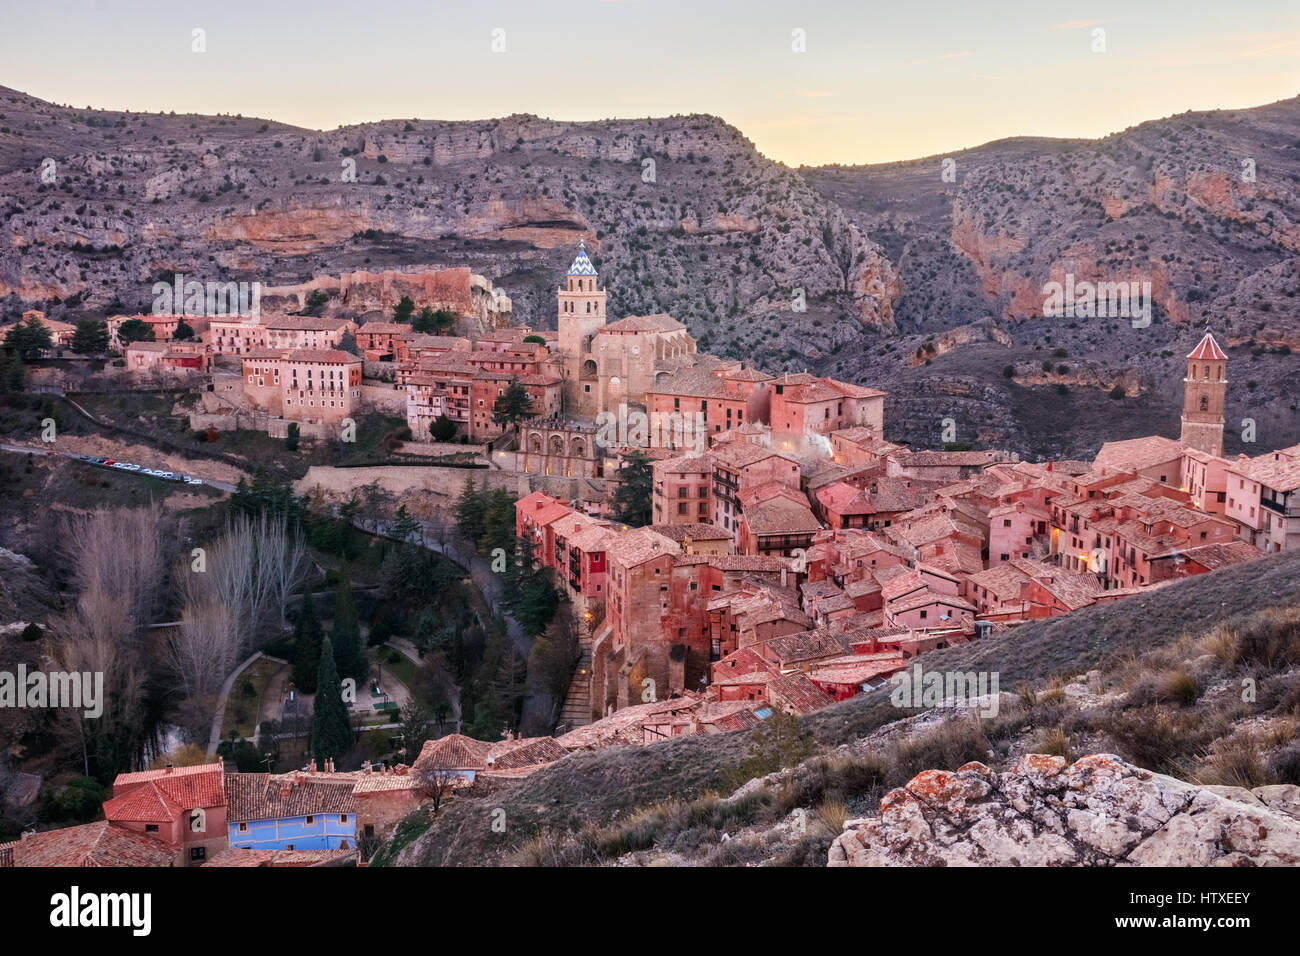 View of the medieval town Albarracin with the hills at the background and the afterglow of the sunset. Albarracin, Teruel, Spain. Stock Photo